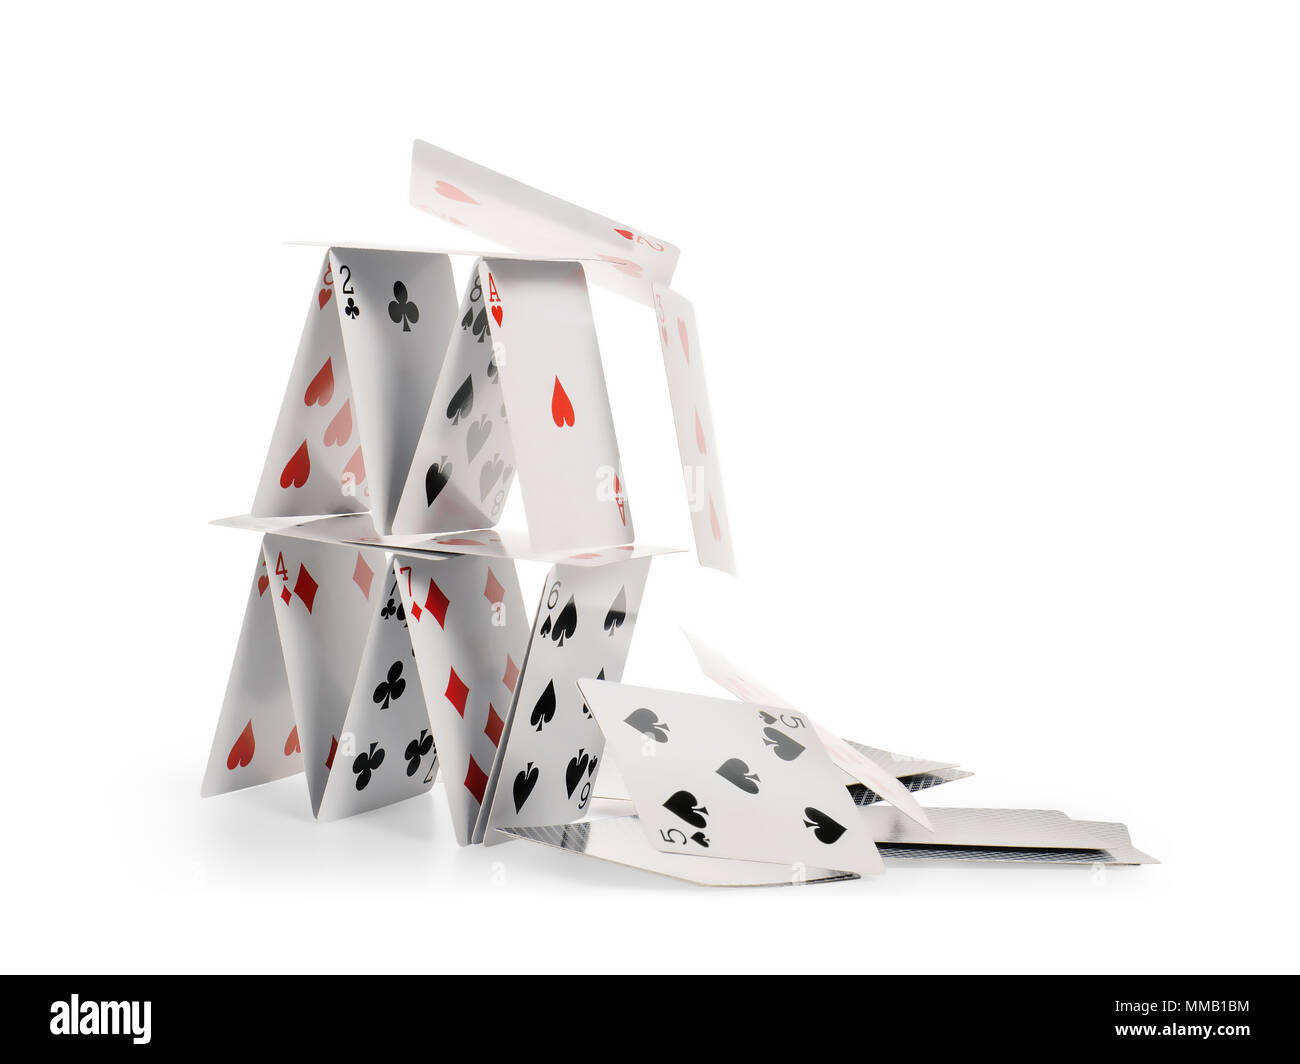 Crashed house of cards. Falling cards isolated on white, clipping path included Stock Photo